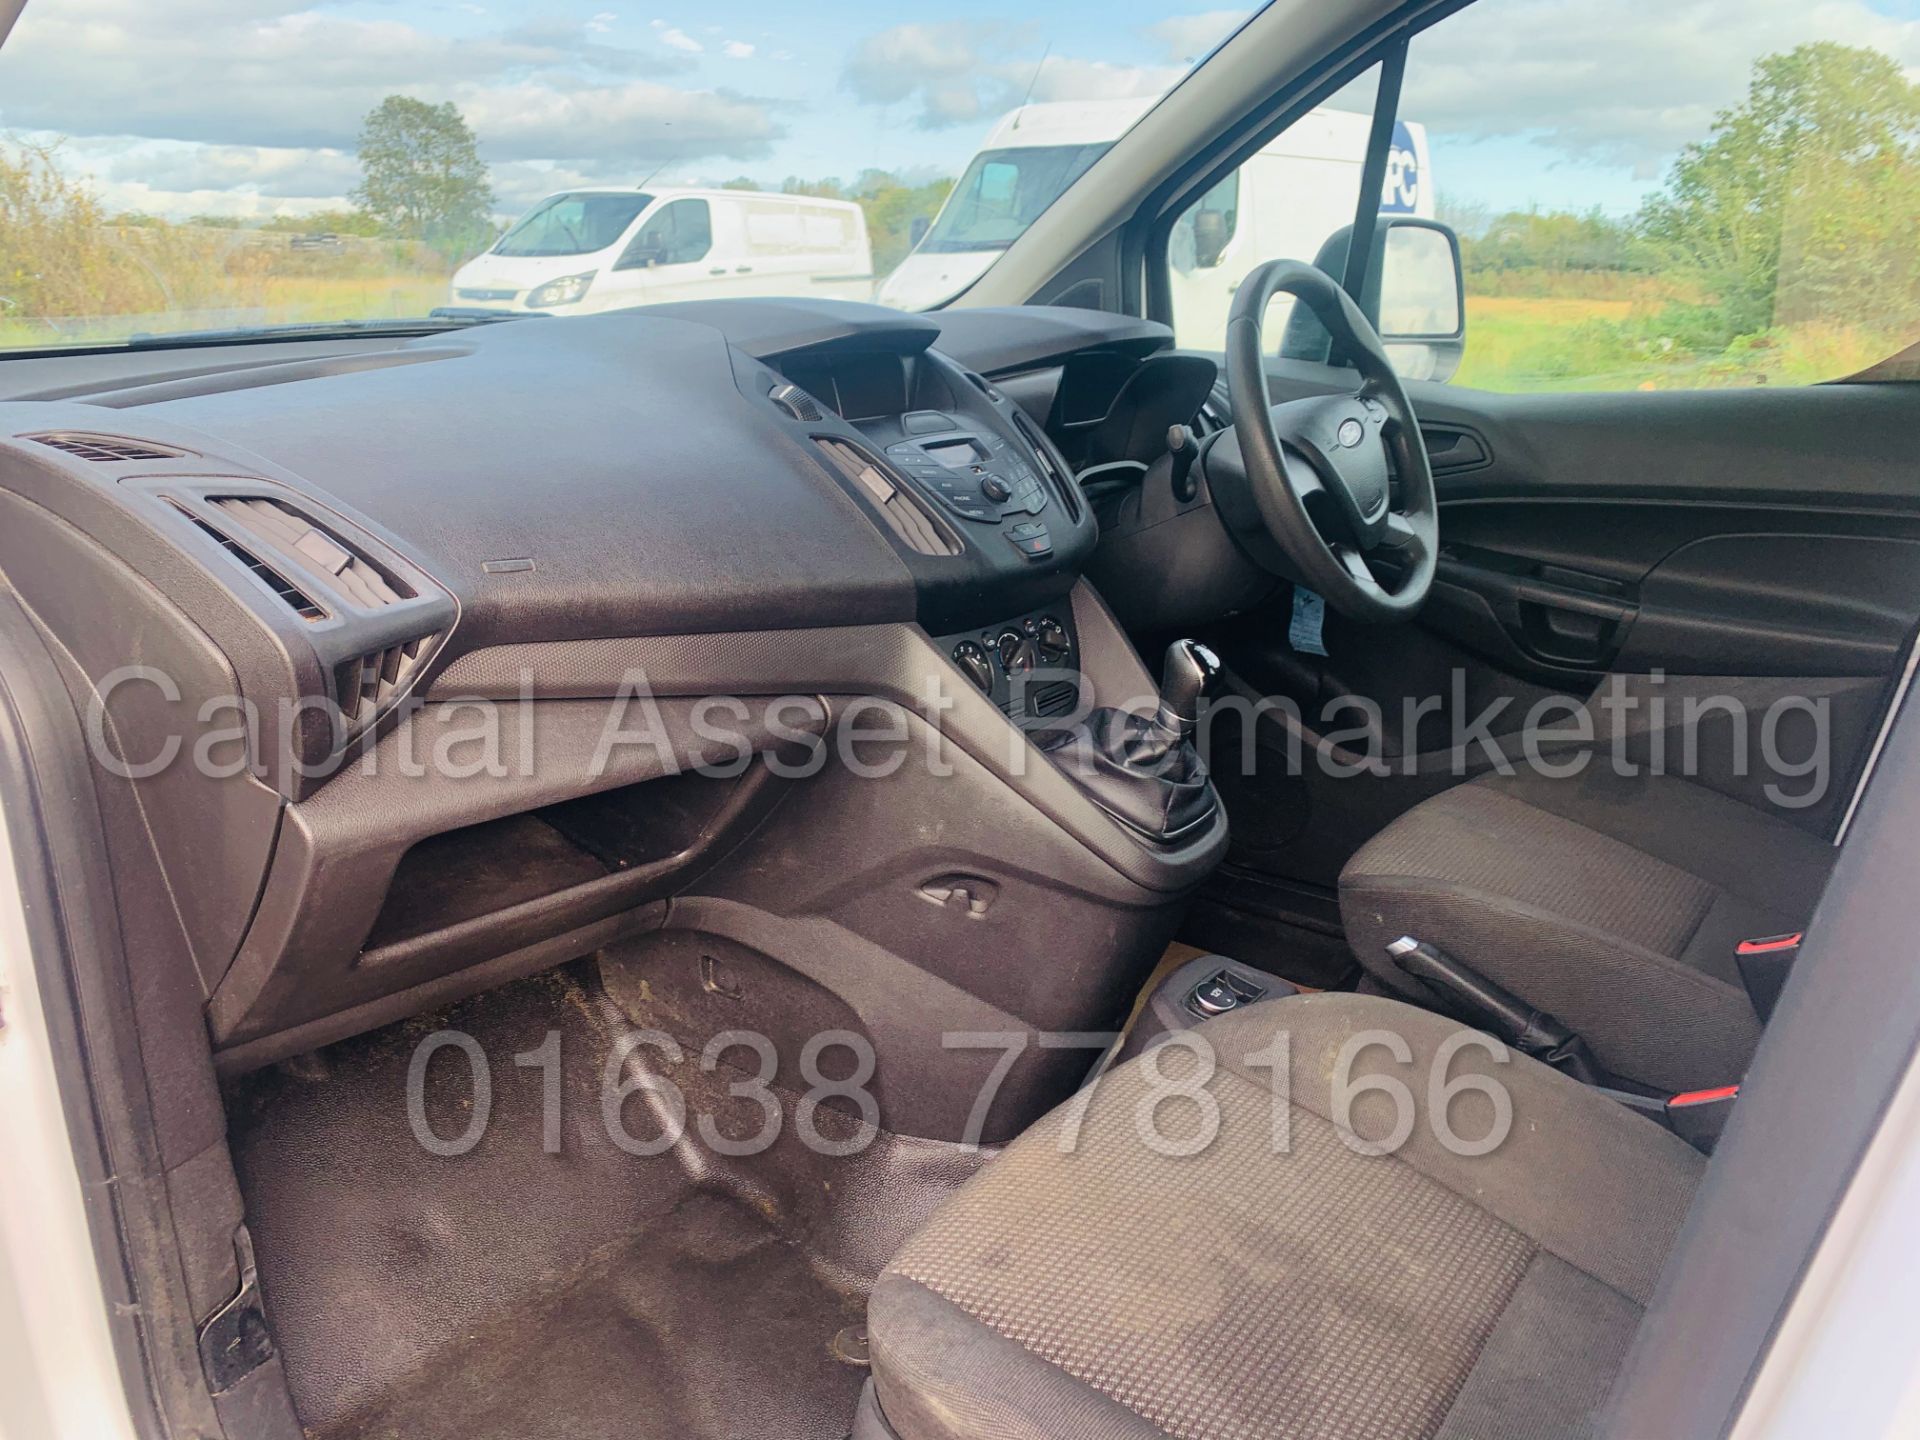 (ON SALE) FORD TRANSIT CONNECT *LWB- 5 SEATER CREW VAN* (2018 - EURO 6) 1.5 TDCI *AIR CON* (1 OWNER) - Image 18 of 40